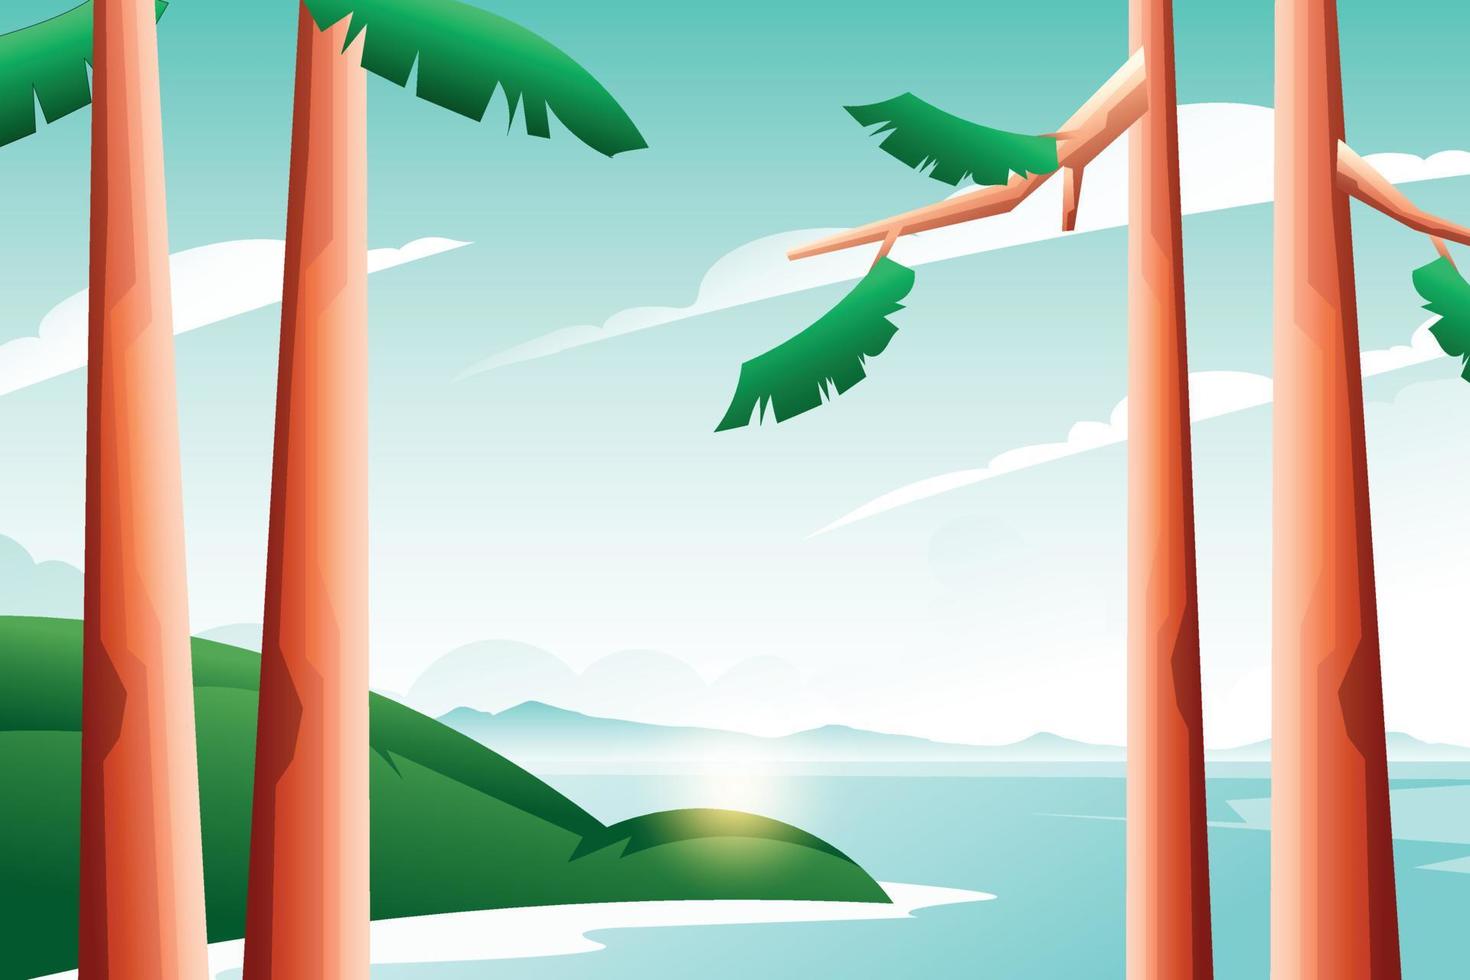 cartoon landscape image of mountains and pine forests. vector